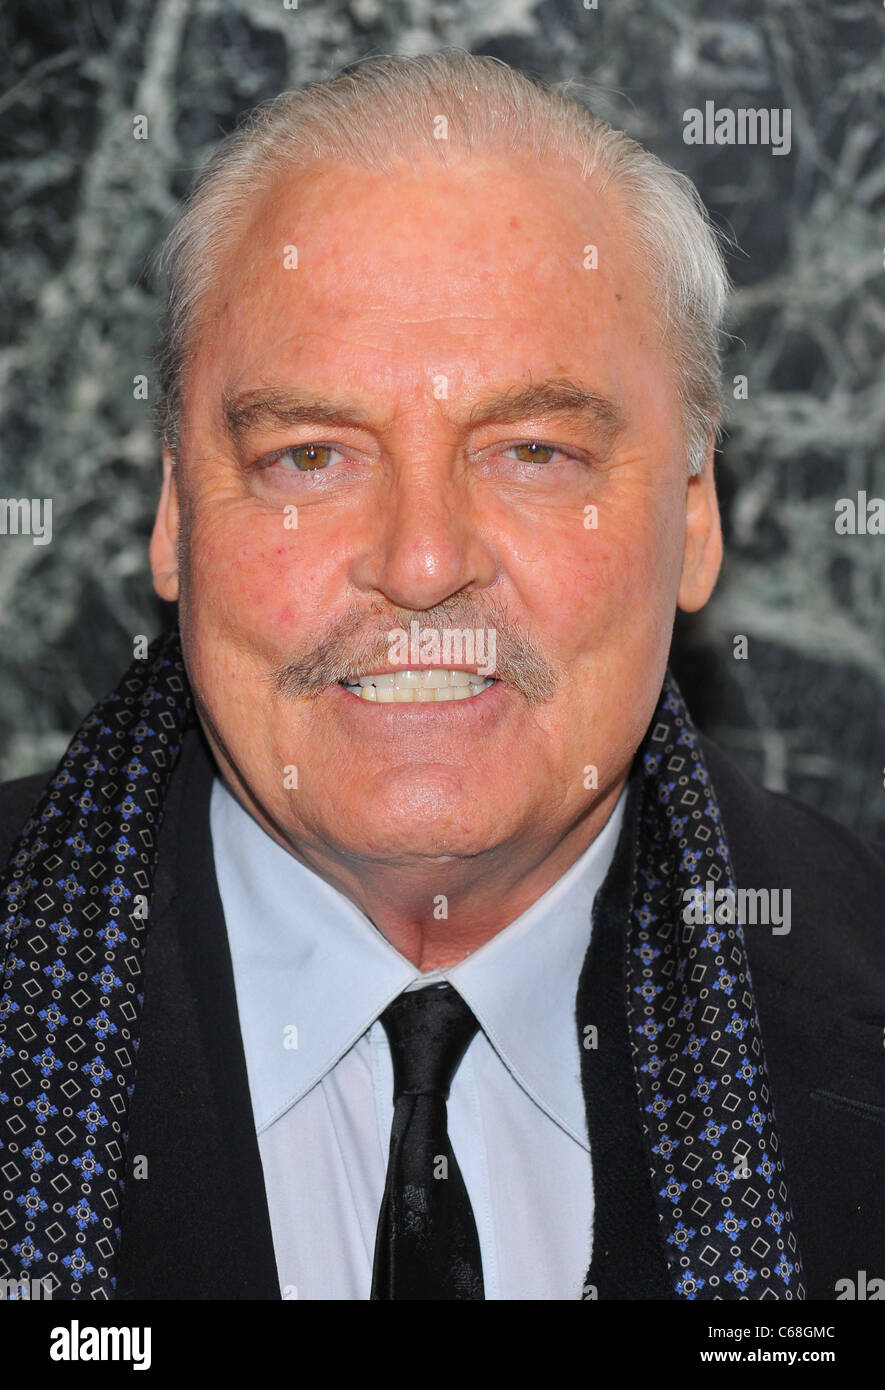 Stacy Keach at arrivals for LIGHTS OUT Series Premiere on FX, Hudson Theater, New York, NY January 5, 2011. Photo By: Gregorio T. Binuya/Everett Collection Stock Photo